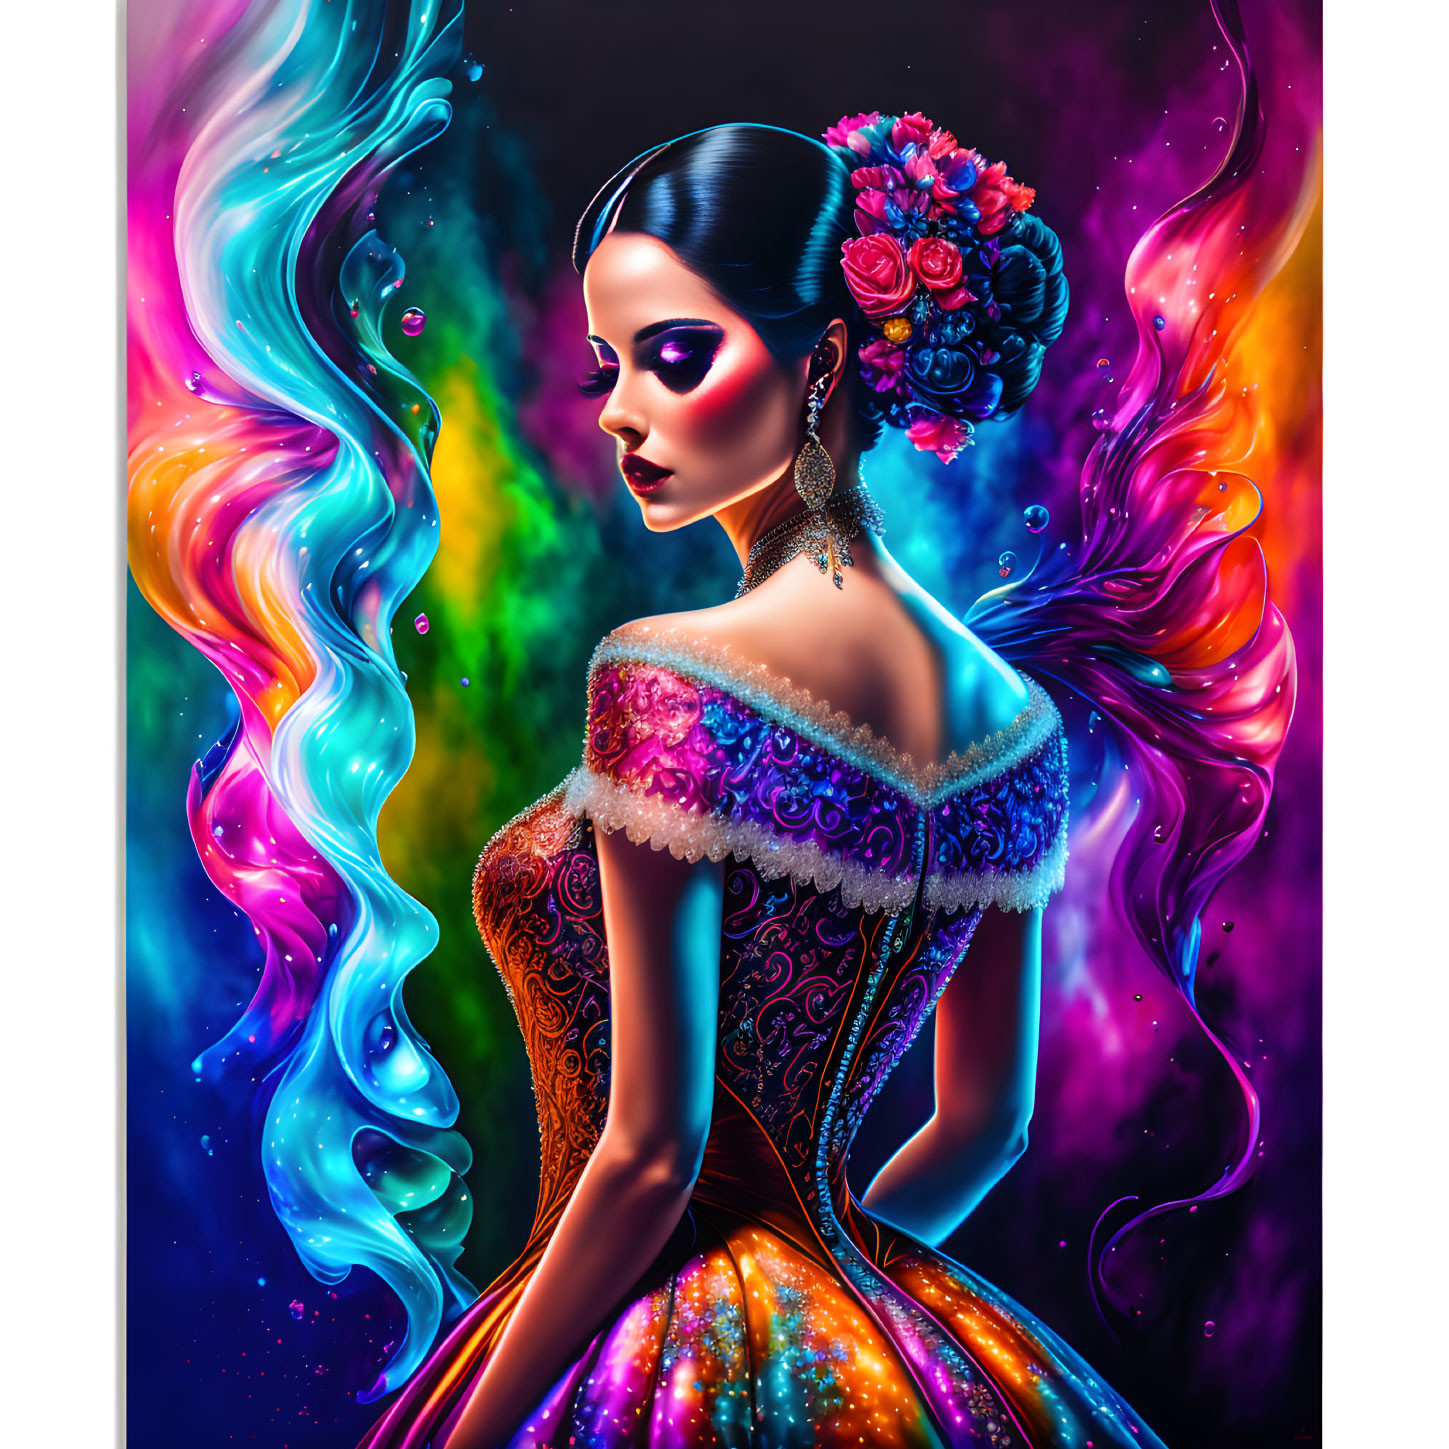 Colorful woman portrait with floral hair and ornate dress on swirling background